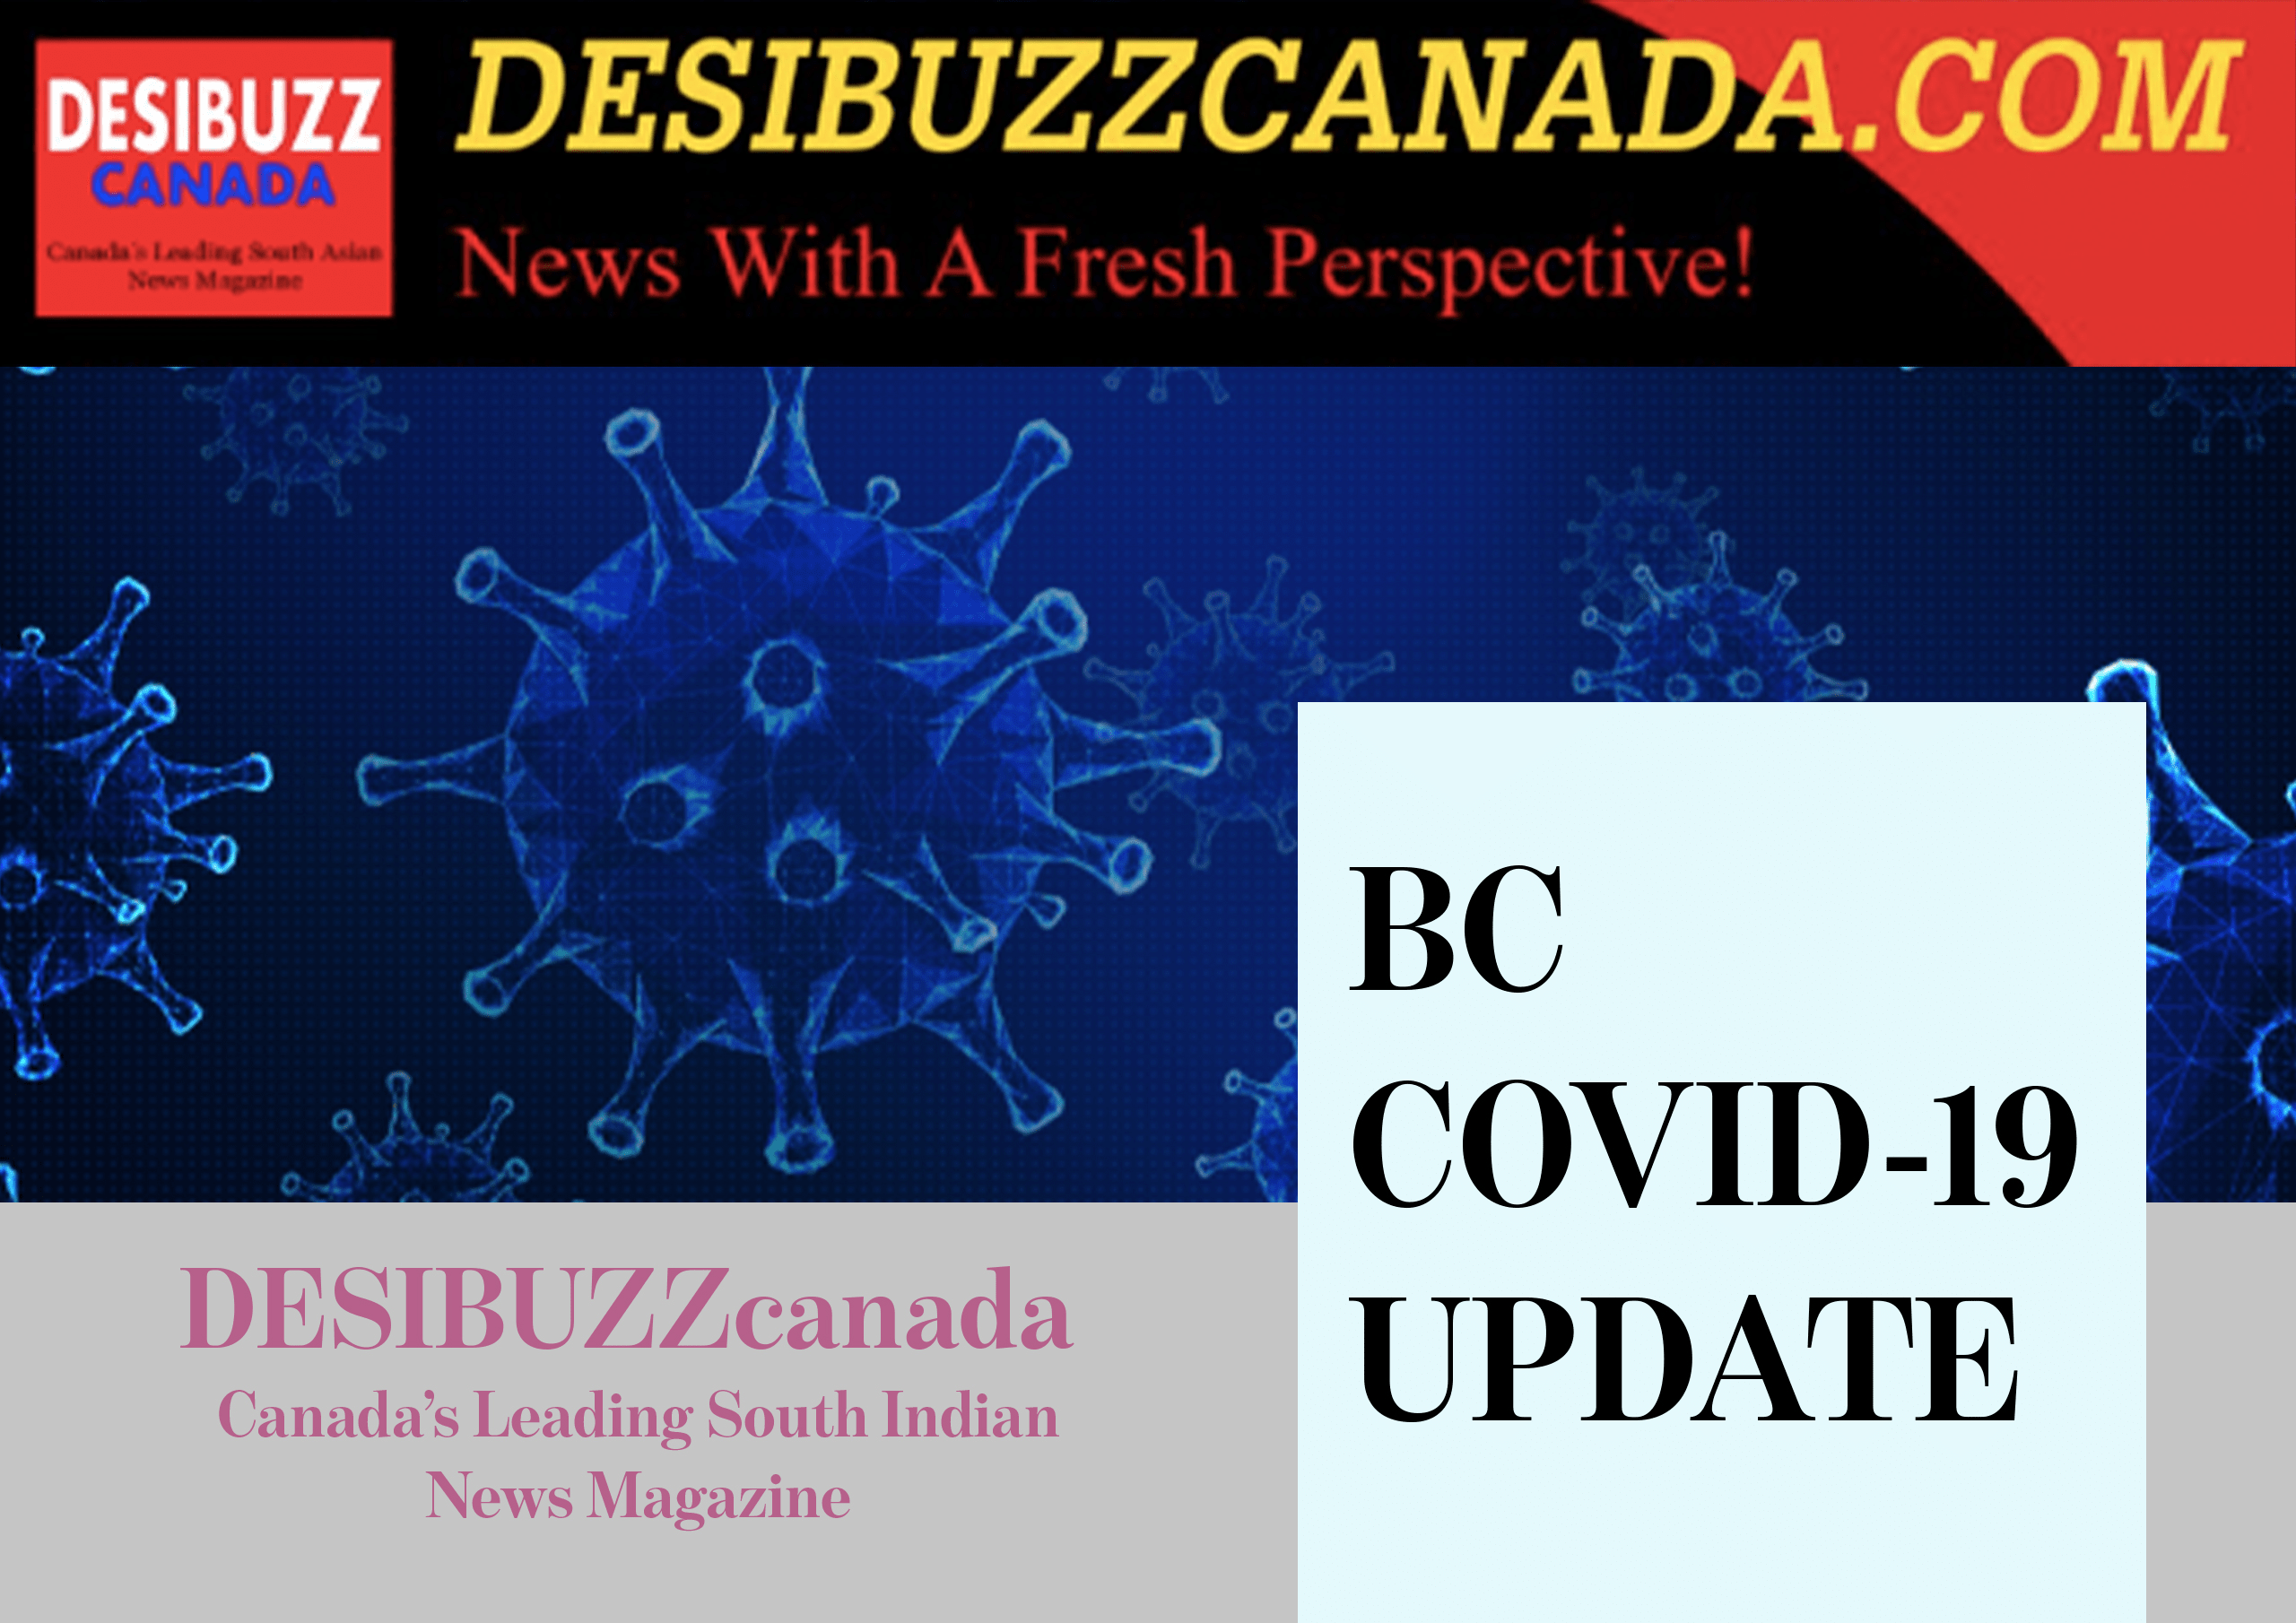 BC COVID-19 DAILY UPDATE: Weekend See Continued Decline In Cases But 12 New Deaths